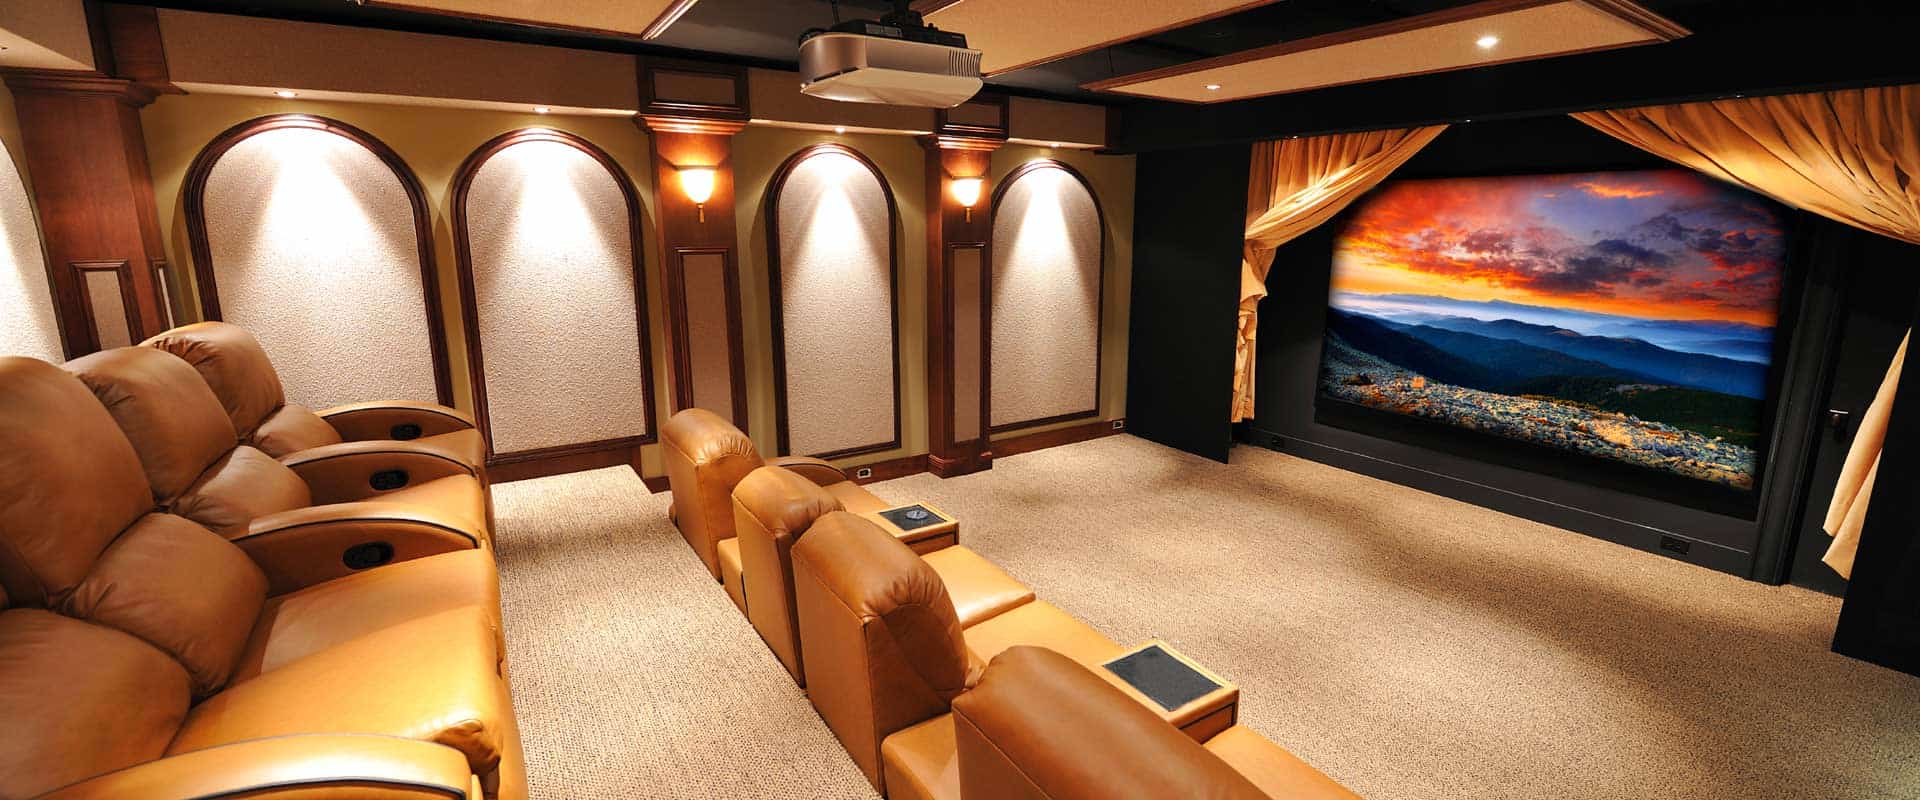 Home Theater Systems – Media Room Design